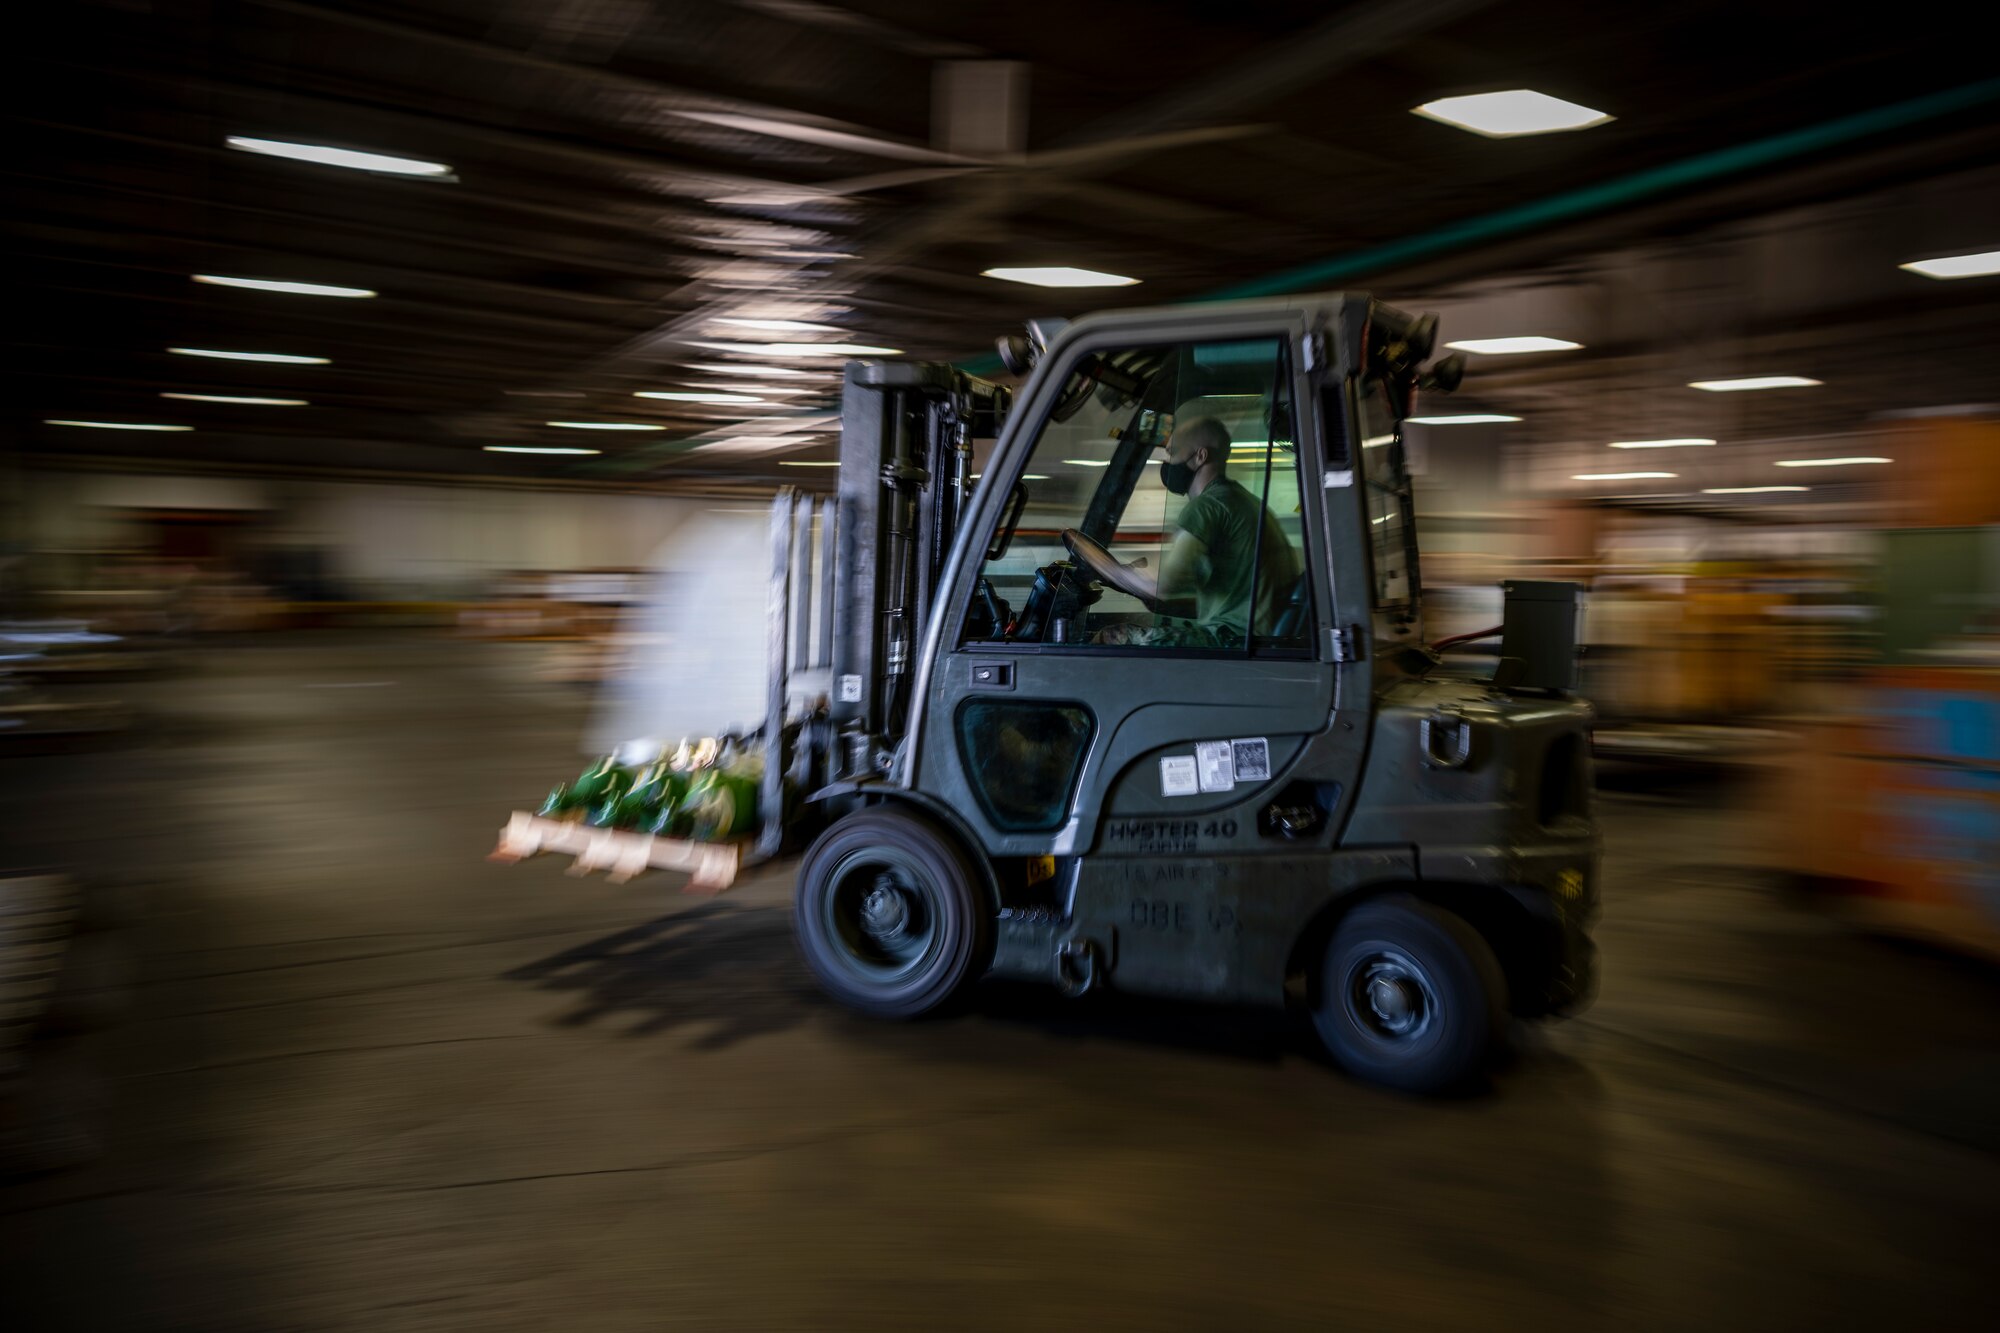 A forklift is seen driving through a large warehouse.